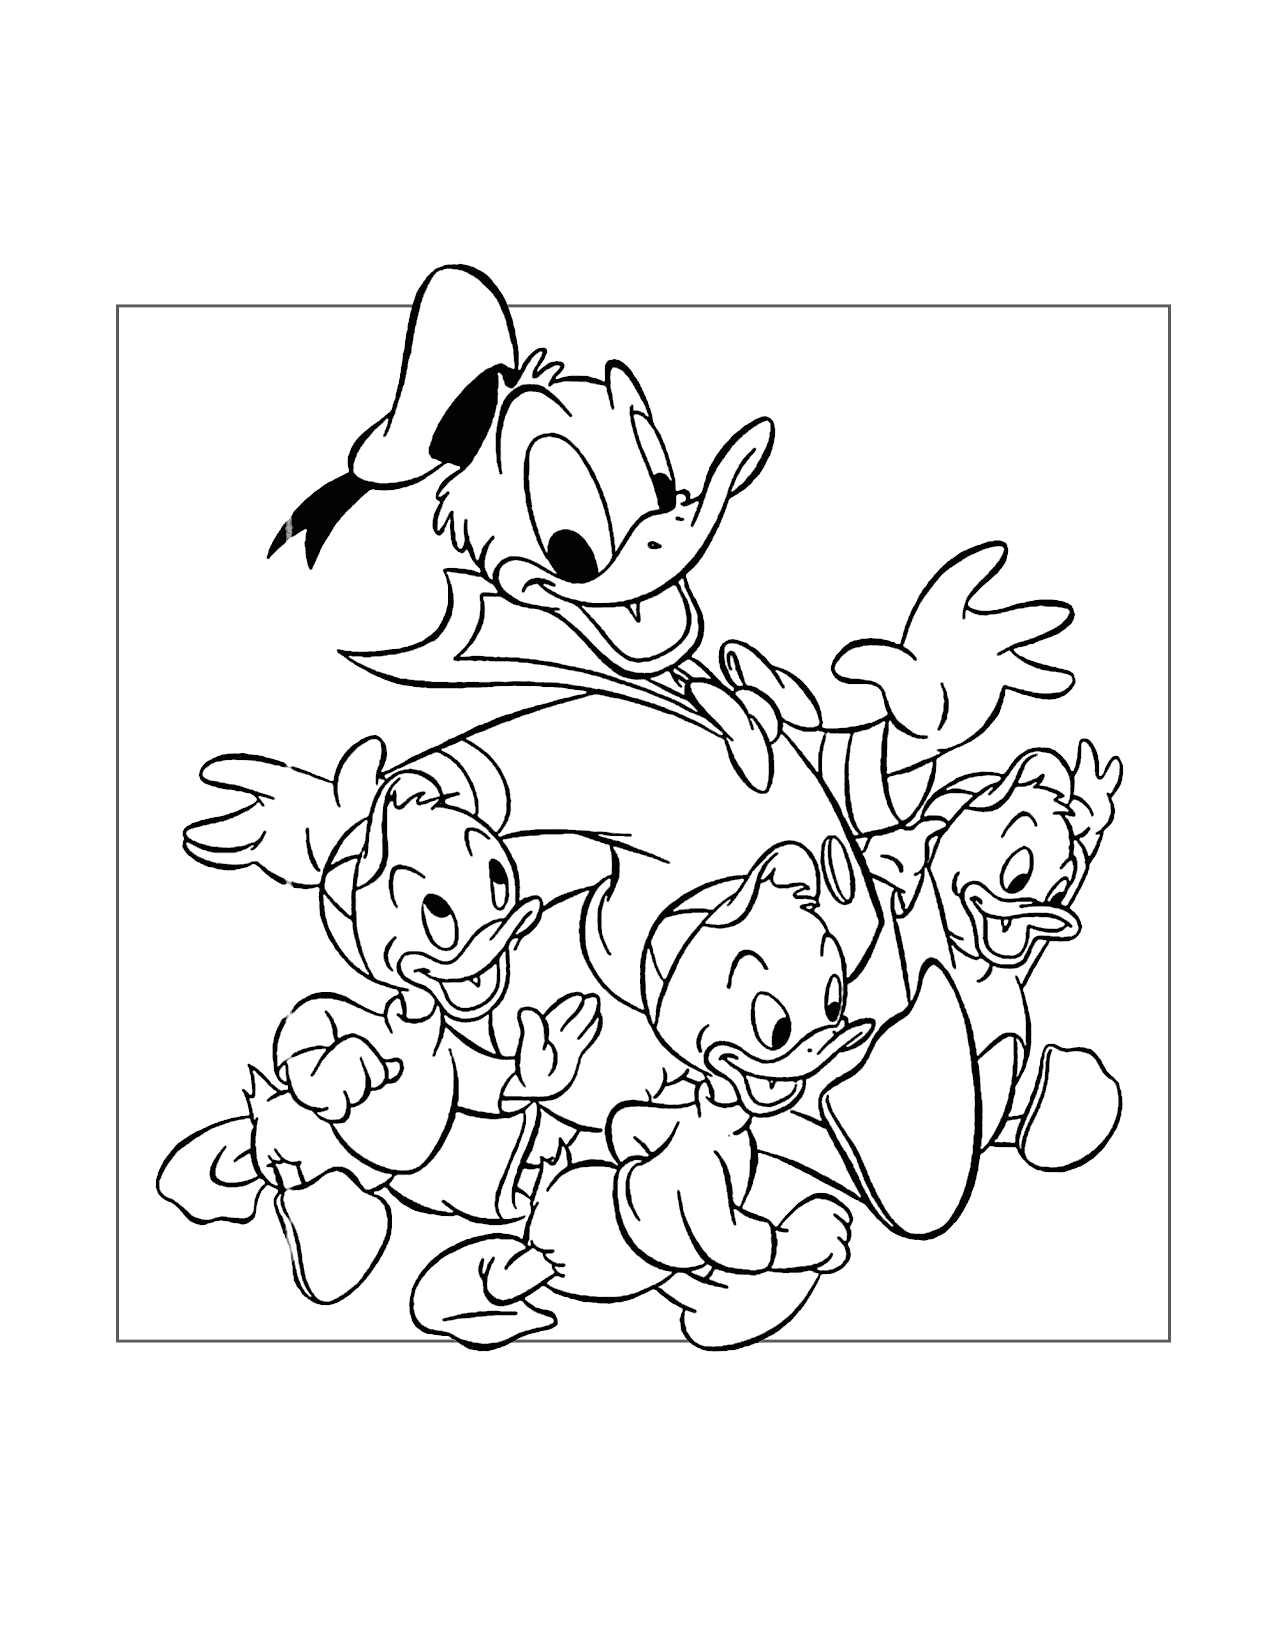 Donald Duck And His Nephews Coloring Page